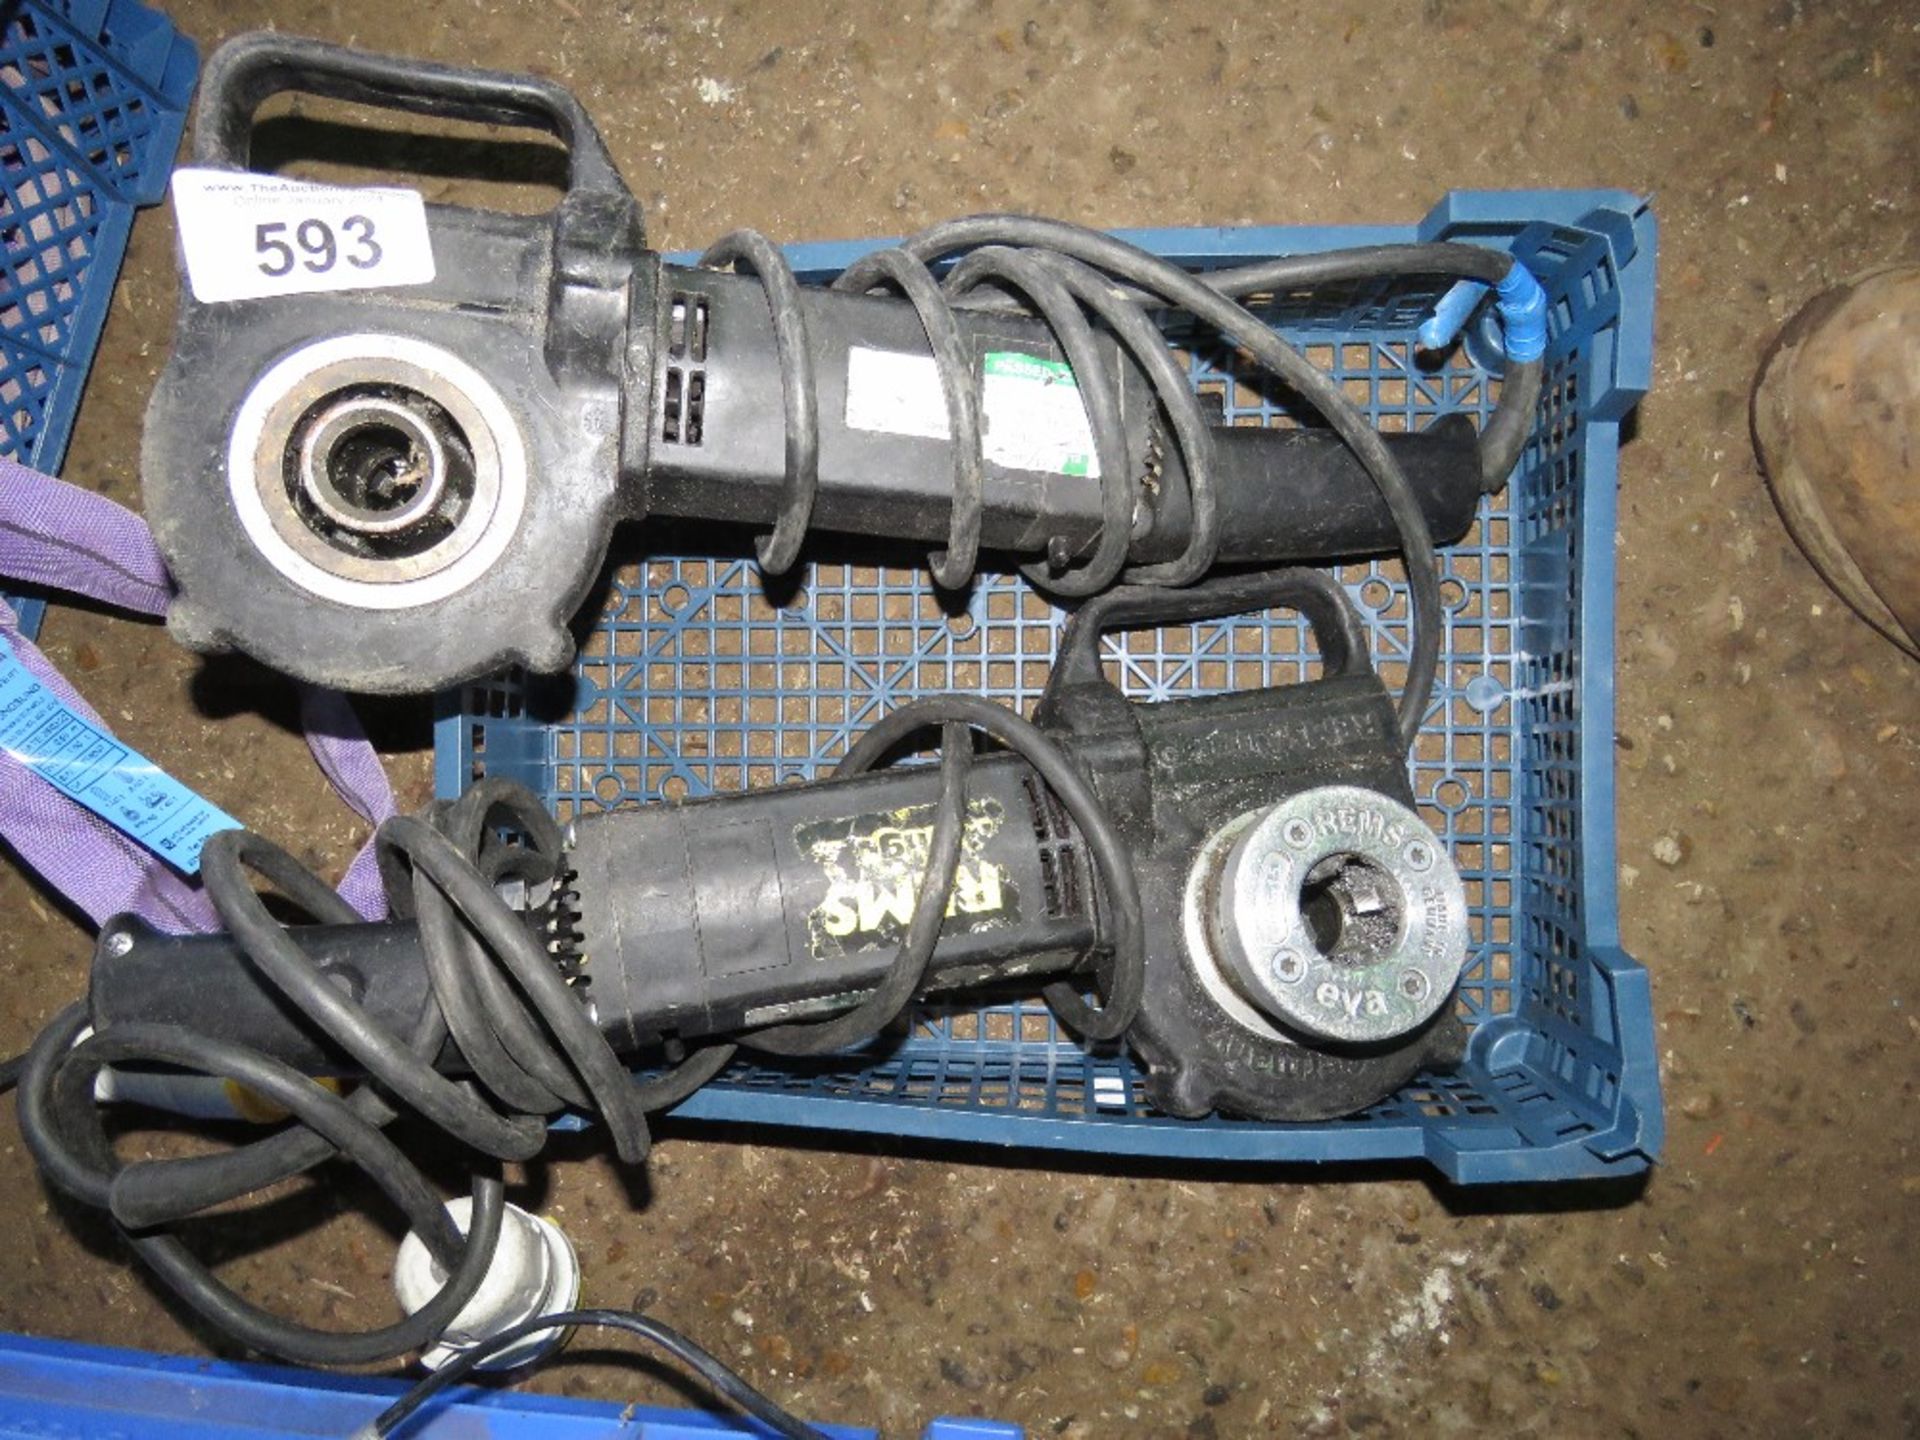 2 X REMS TYPE 110VOLT POWERED HAND HELD PIPE THREADERS. SOURCED FROM COMPANY LIQUIDATION.